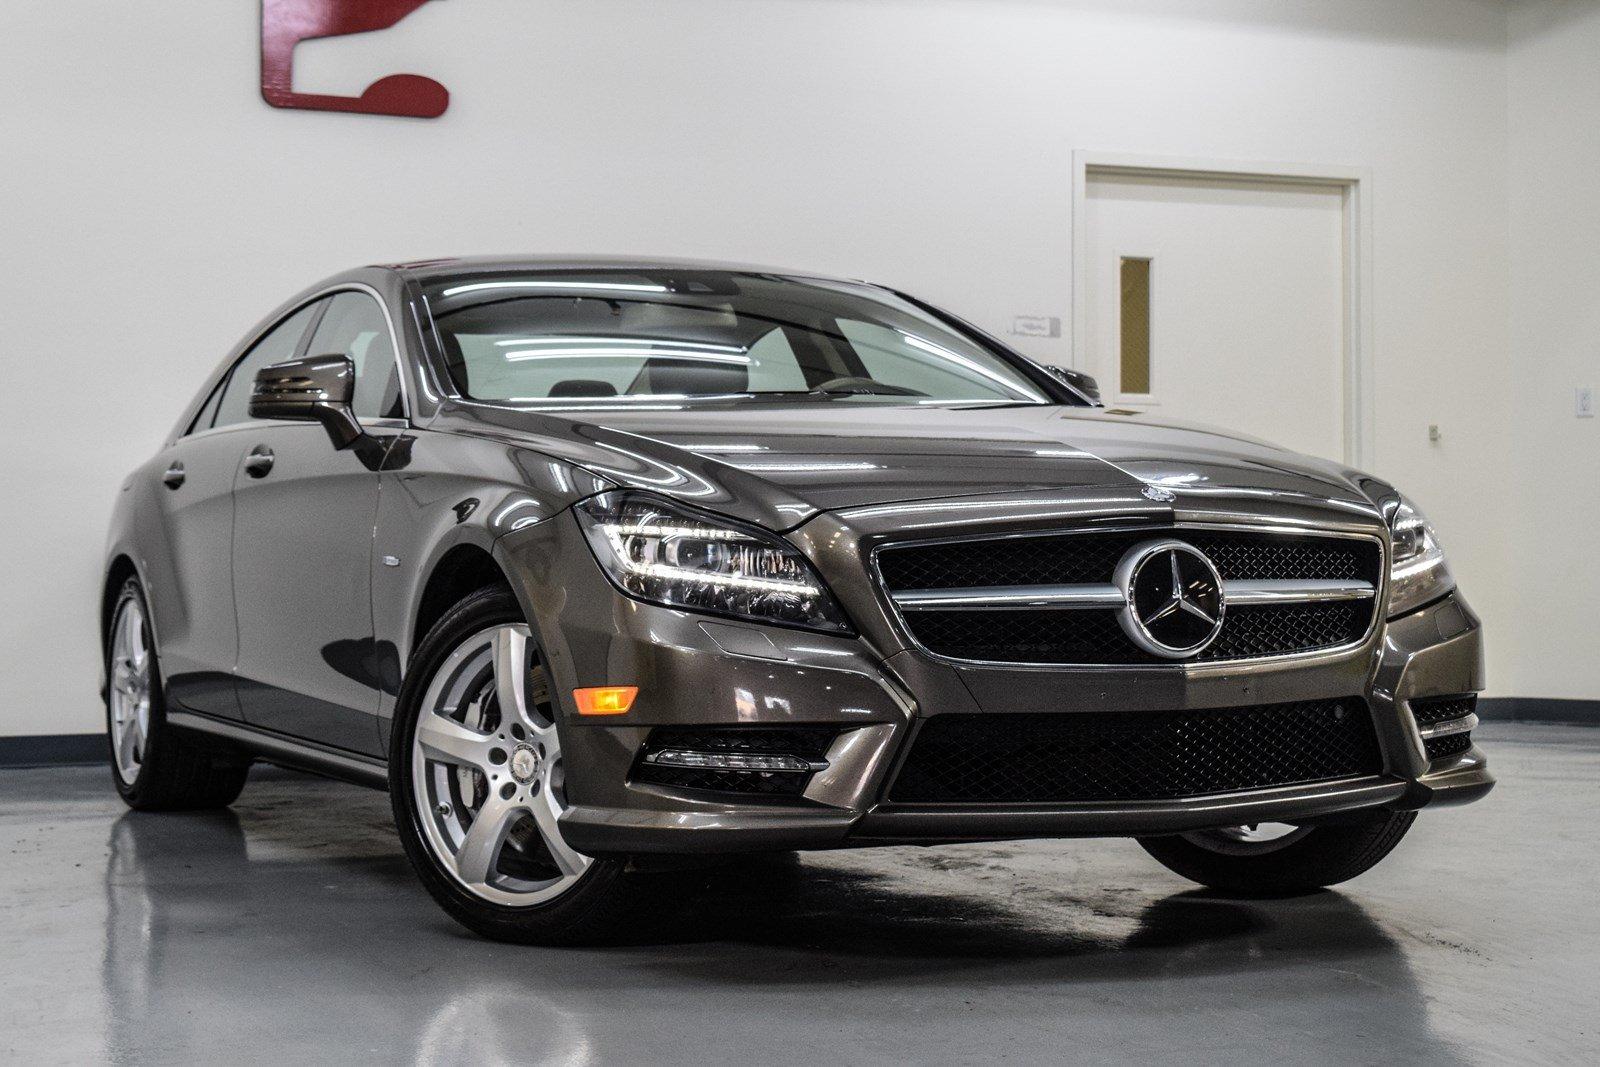 Used 2012 Mercedes-Benz CLS-Class CLS550 for sale Sold at Gravity Autos Marietta in Marietta GA 30060 2